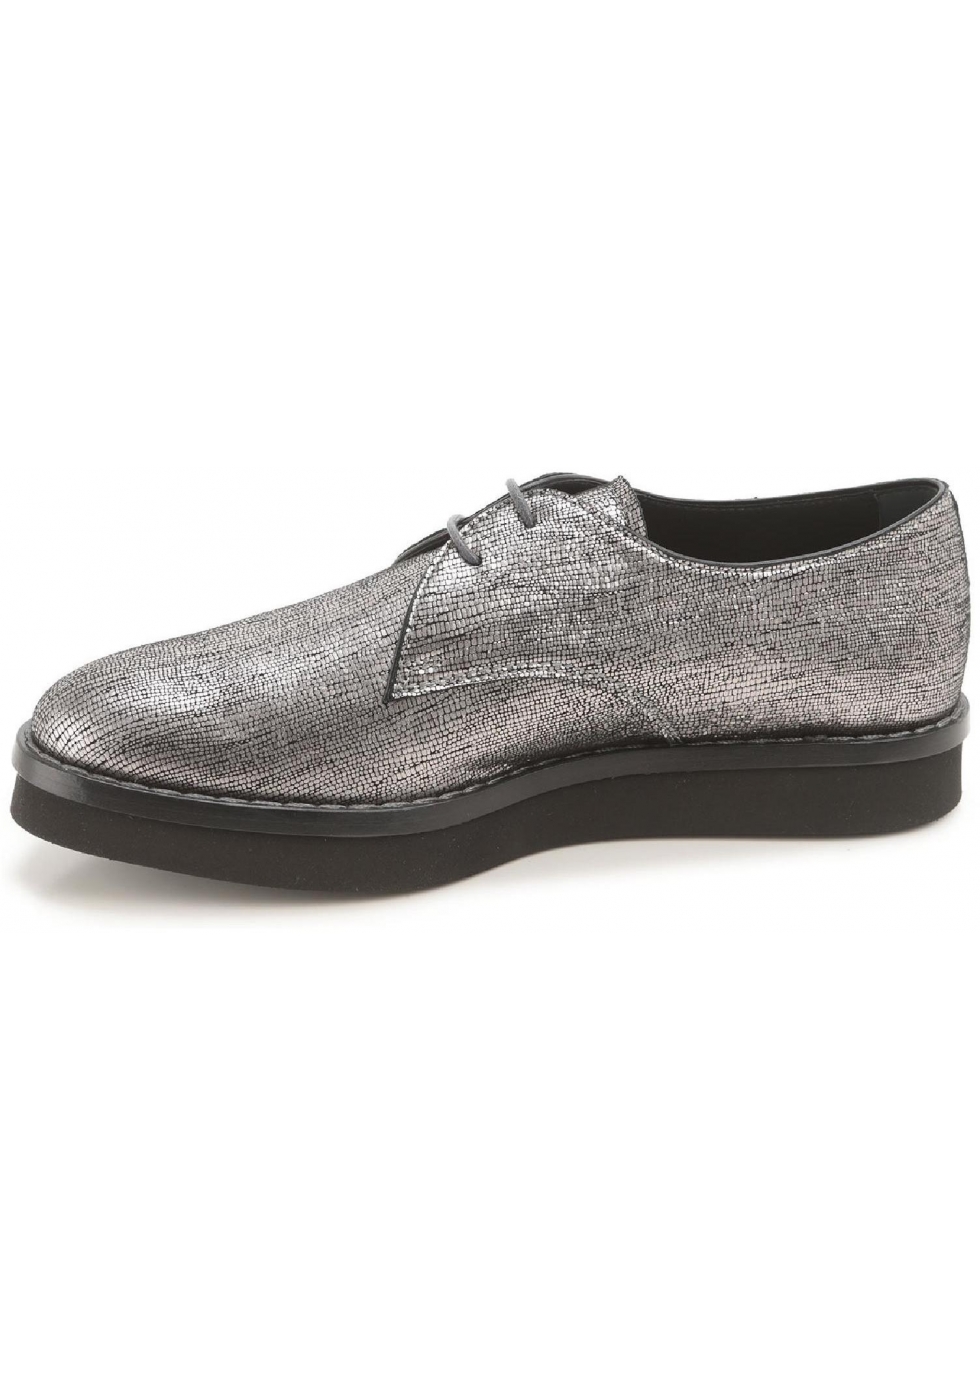 Tod's women's flat lace-up in silver metallic leather - Italian Boutique